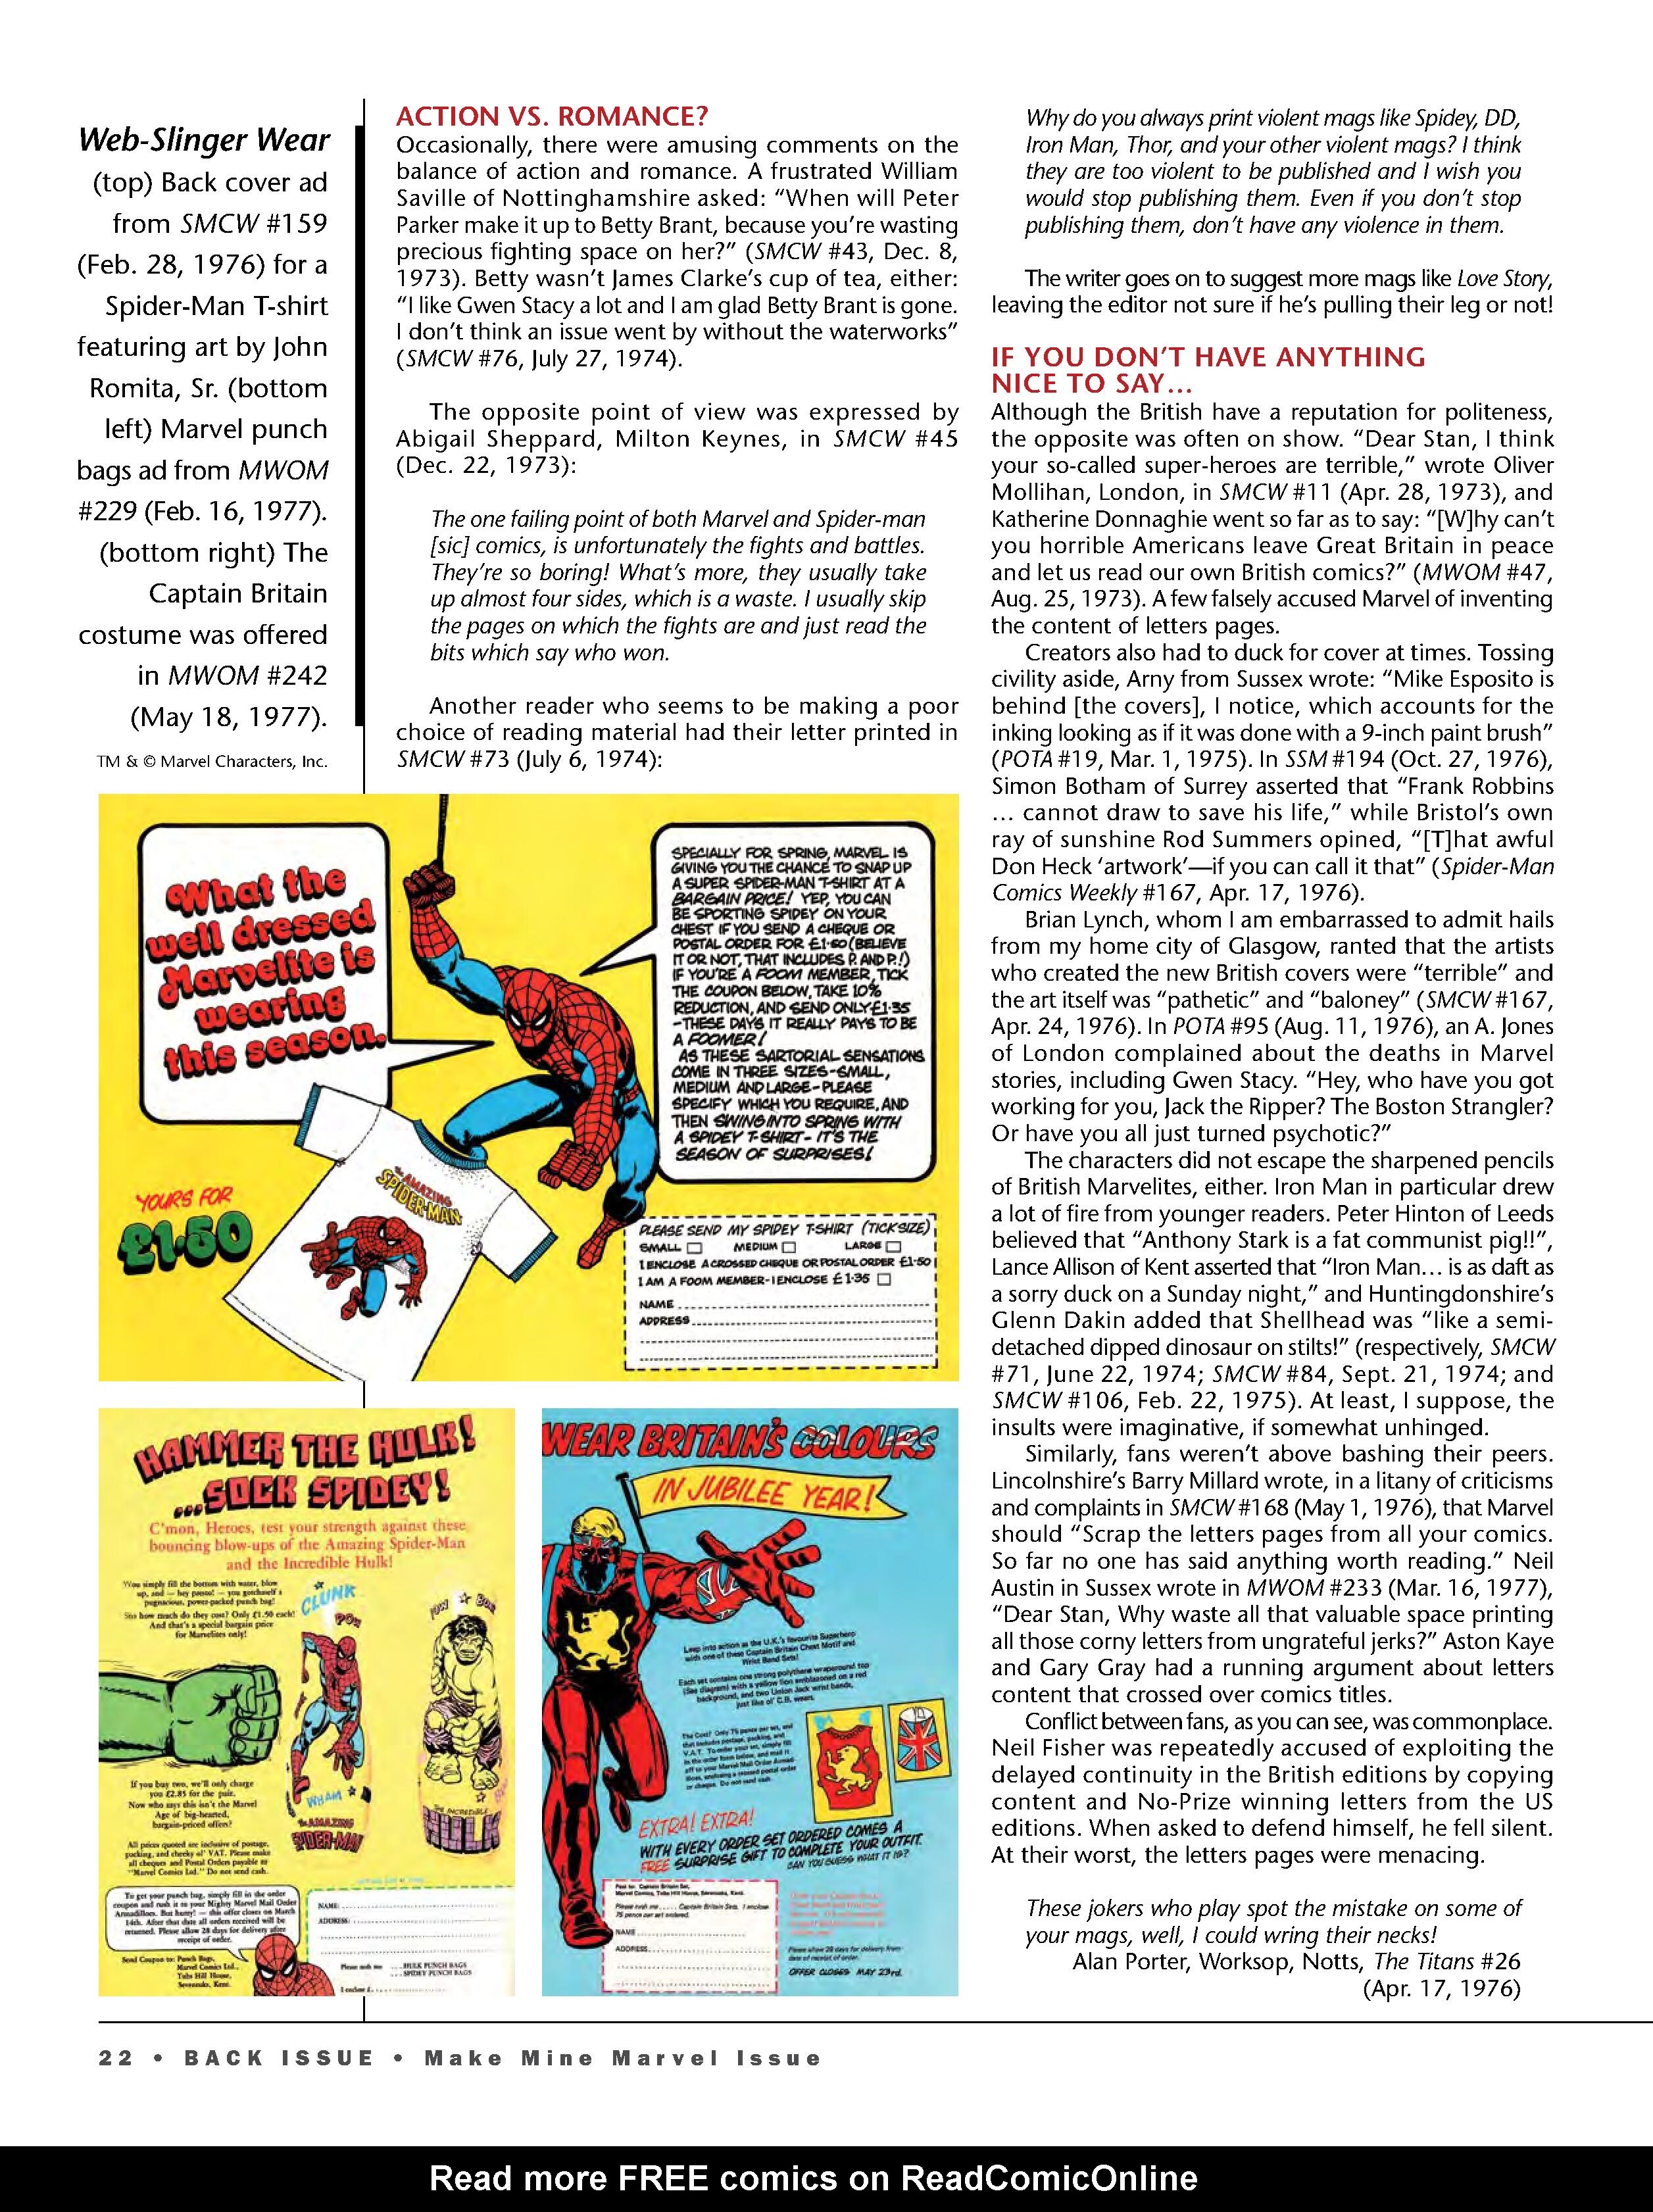 Read online Back Issue comic -  Issue #110 - 24